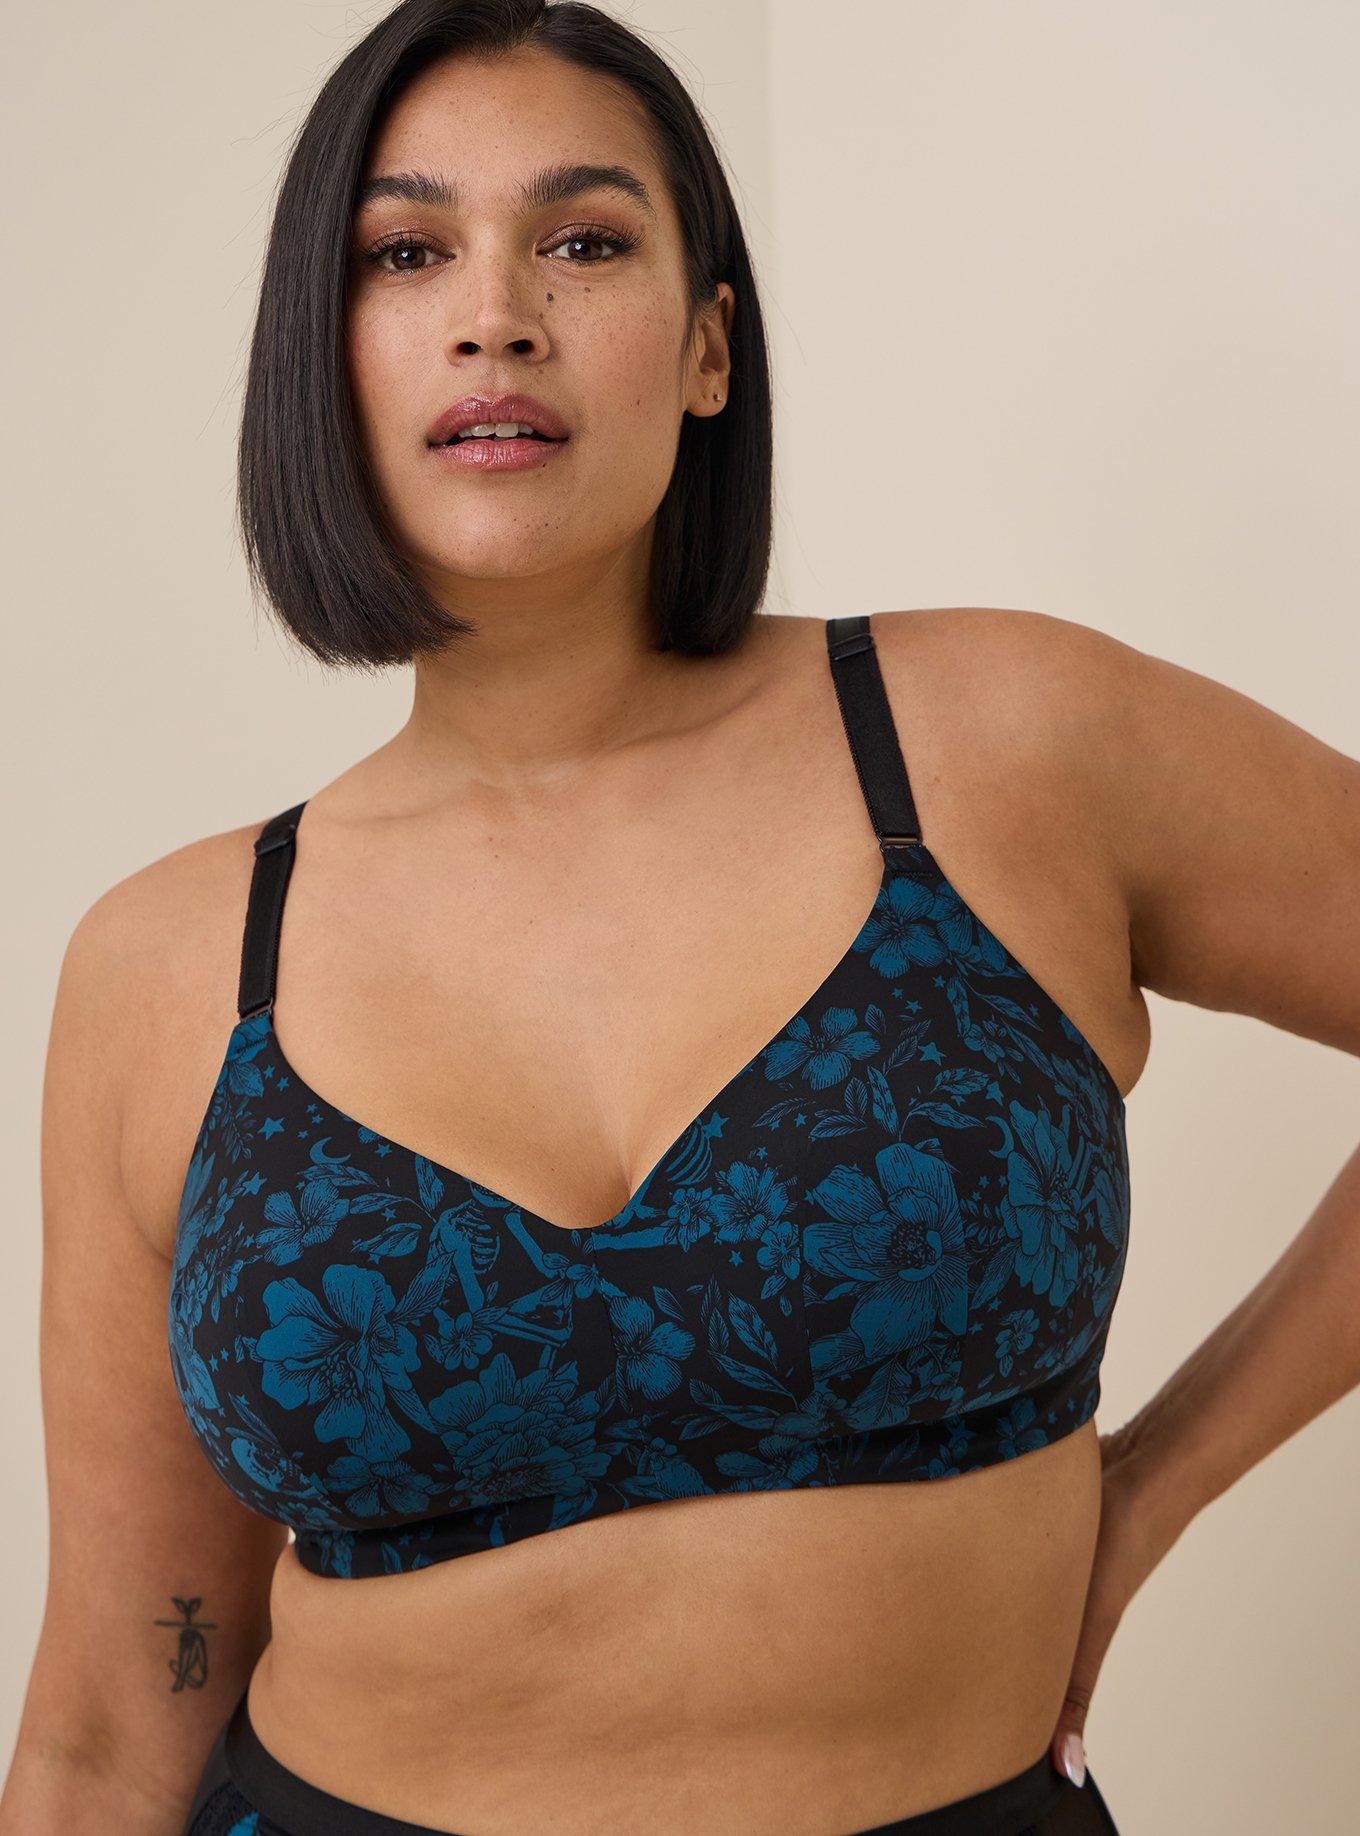 Torrid - Red & Black Heart 360° Back Smoothing™ Lightly Lined Everyday  Wire-Free Bra